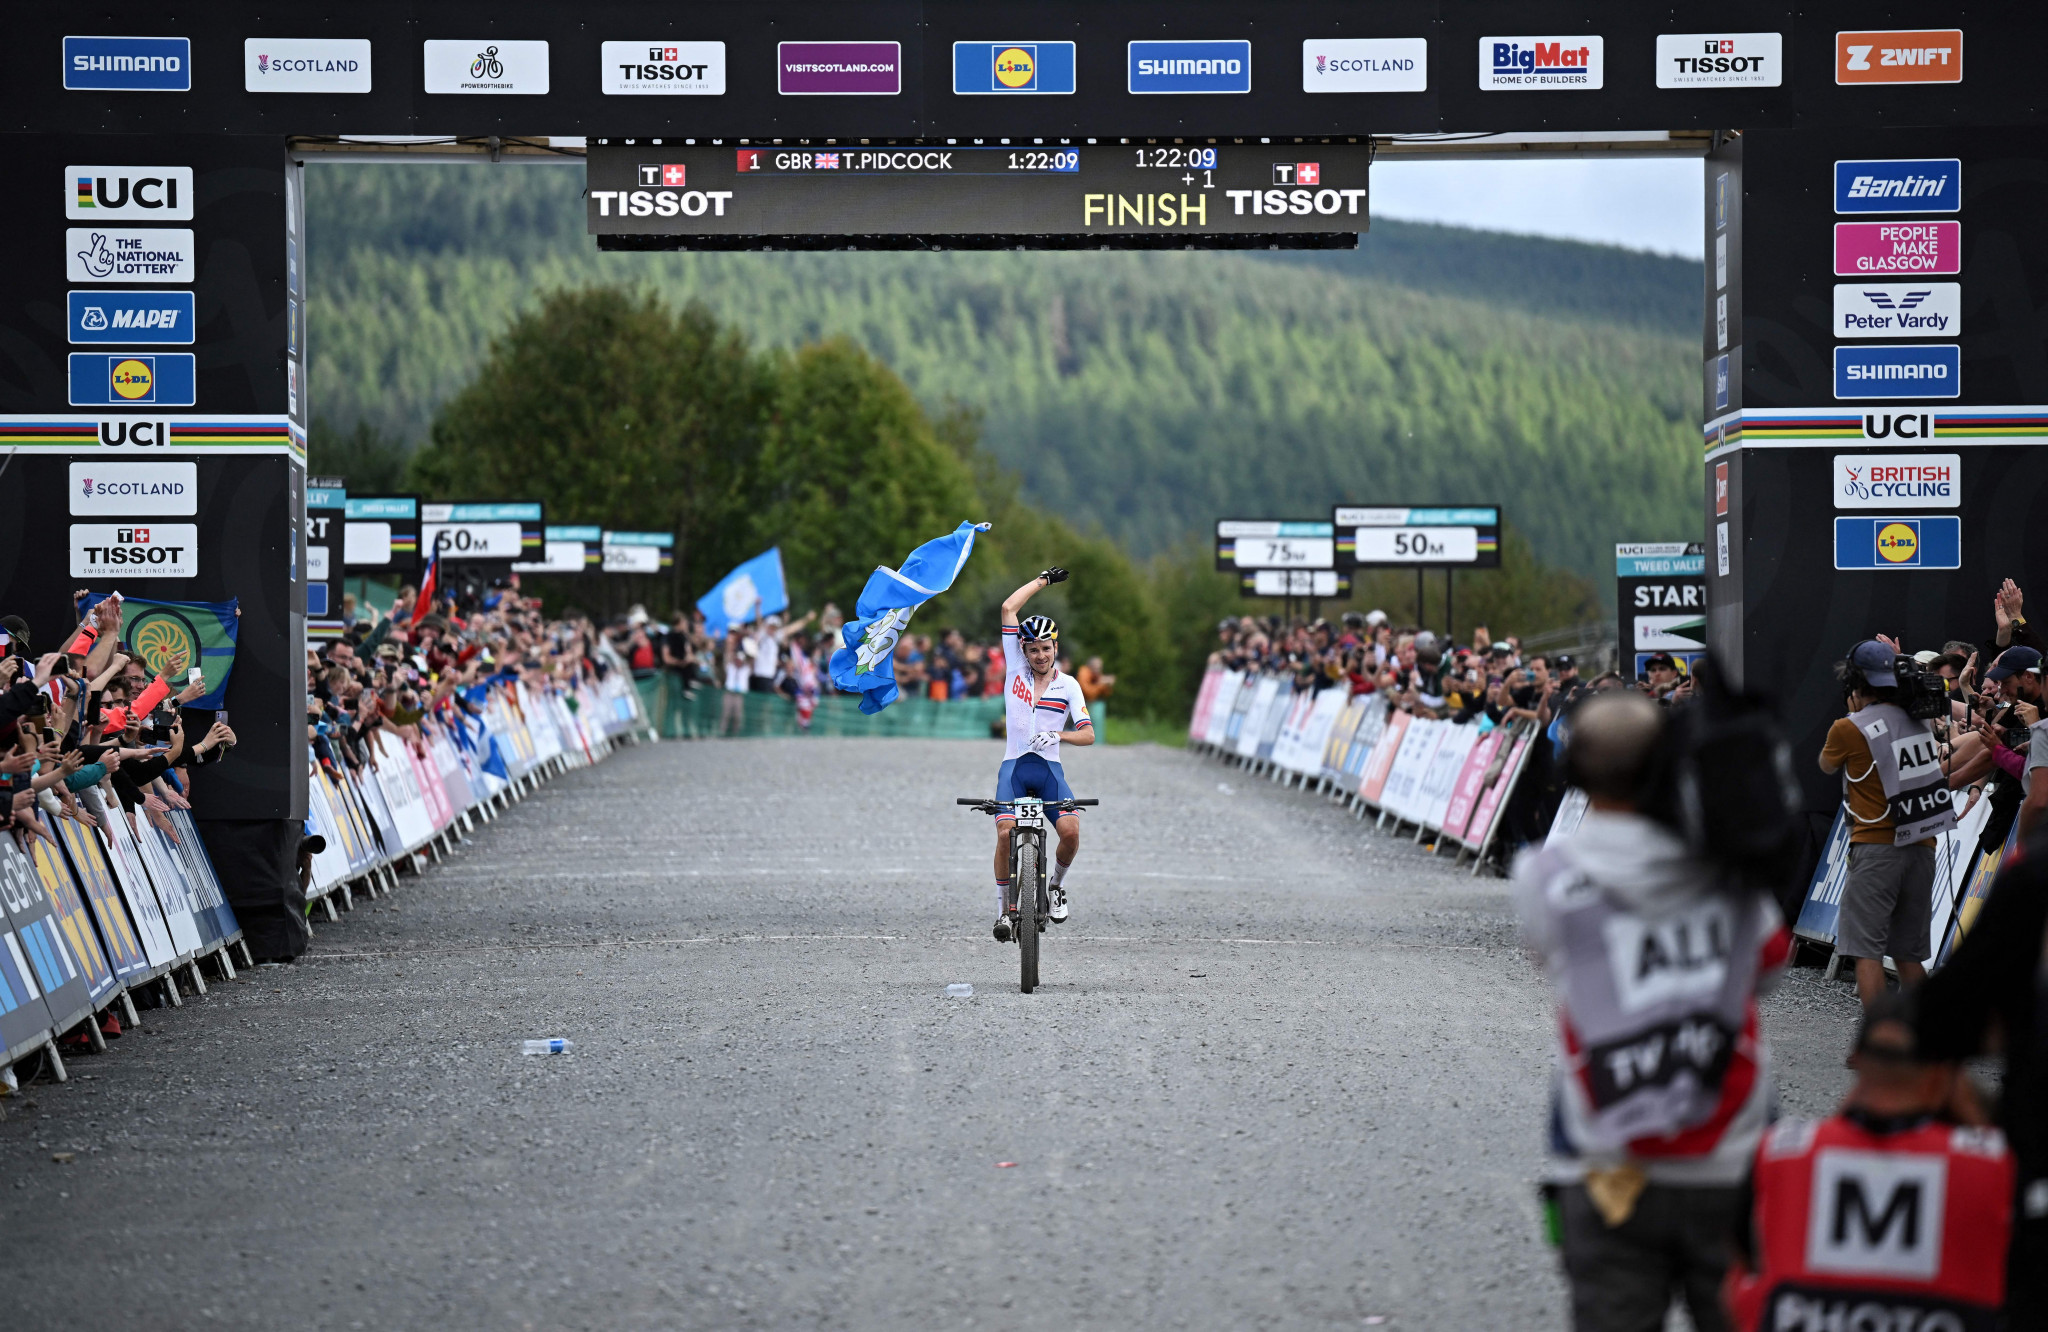 Pidcock and Ferrand-Prévot prevail in Cycling World Championships mountain bike events